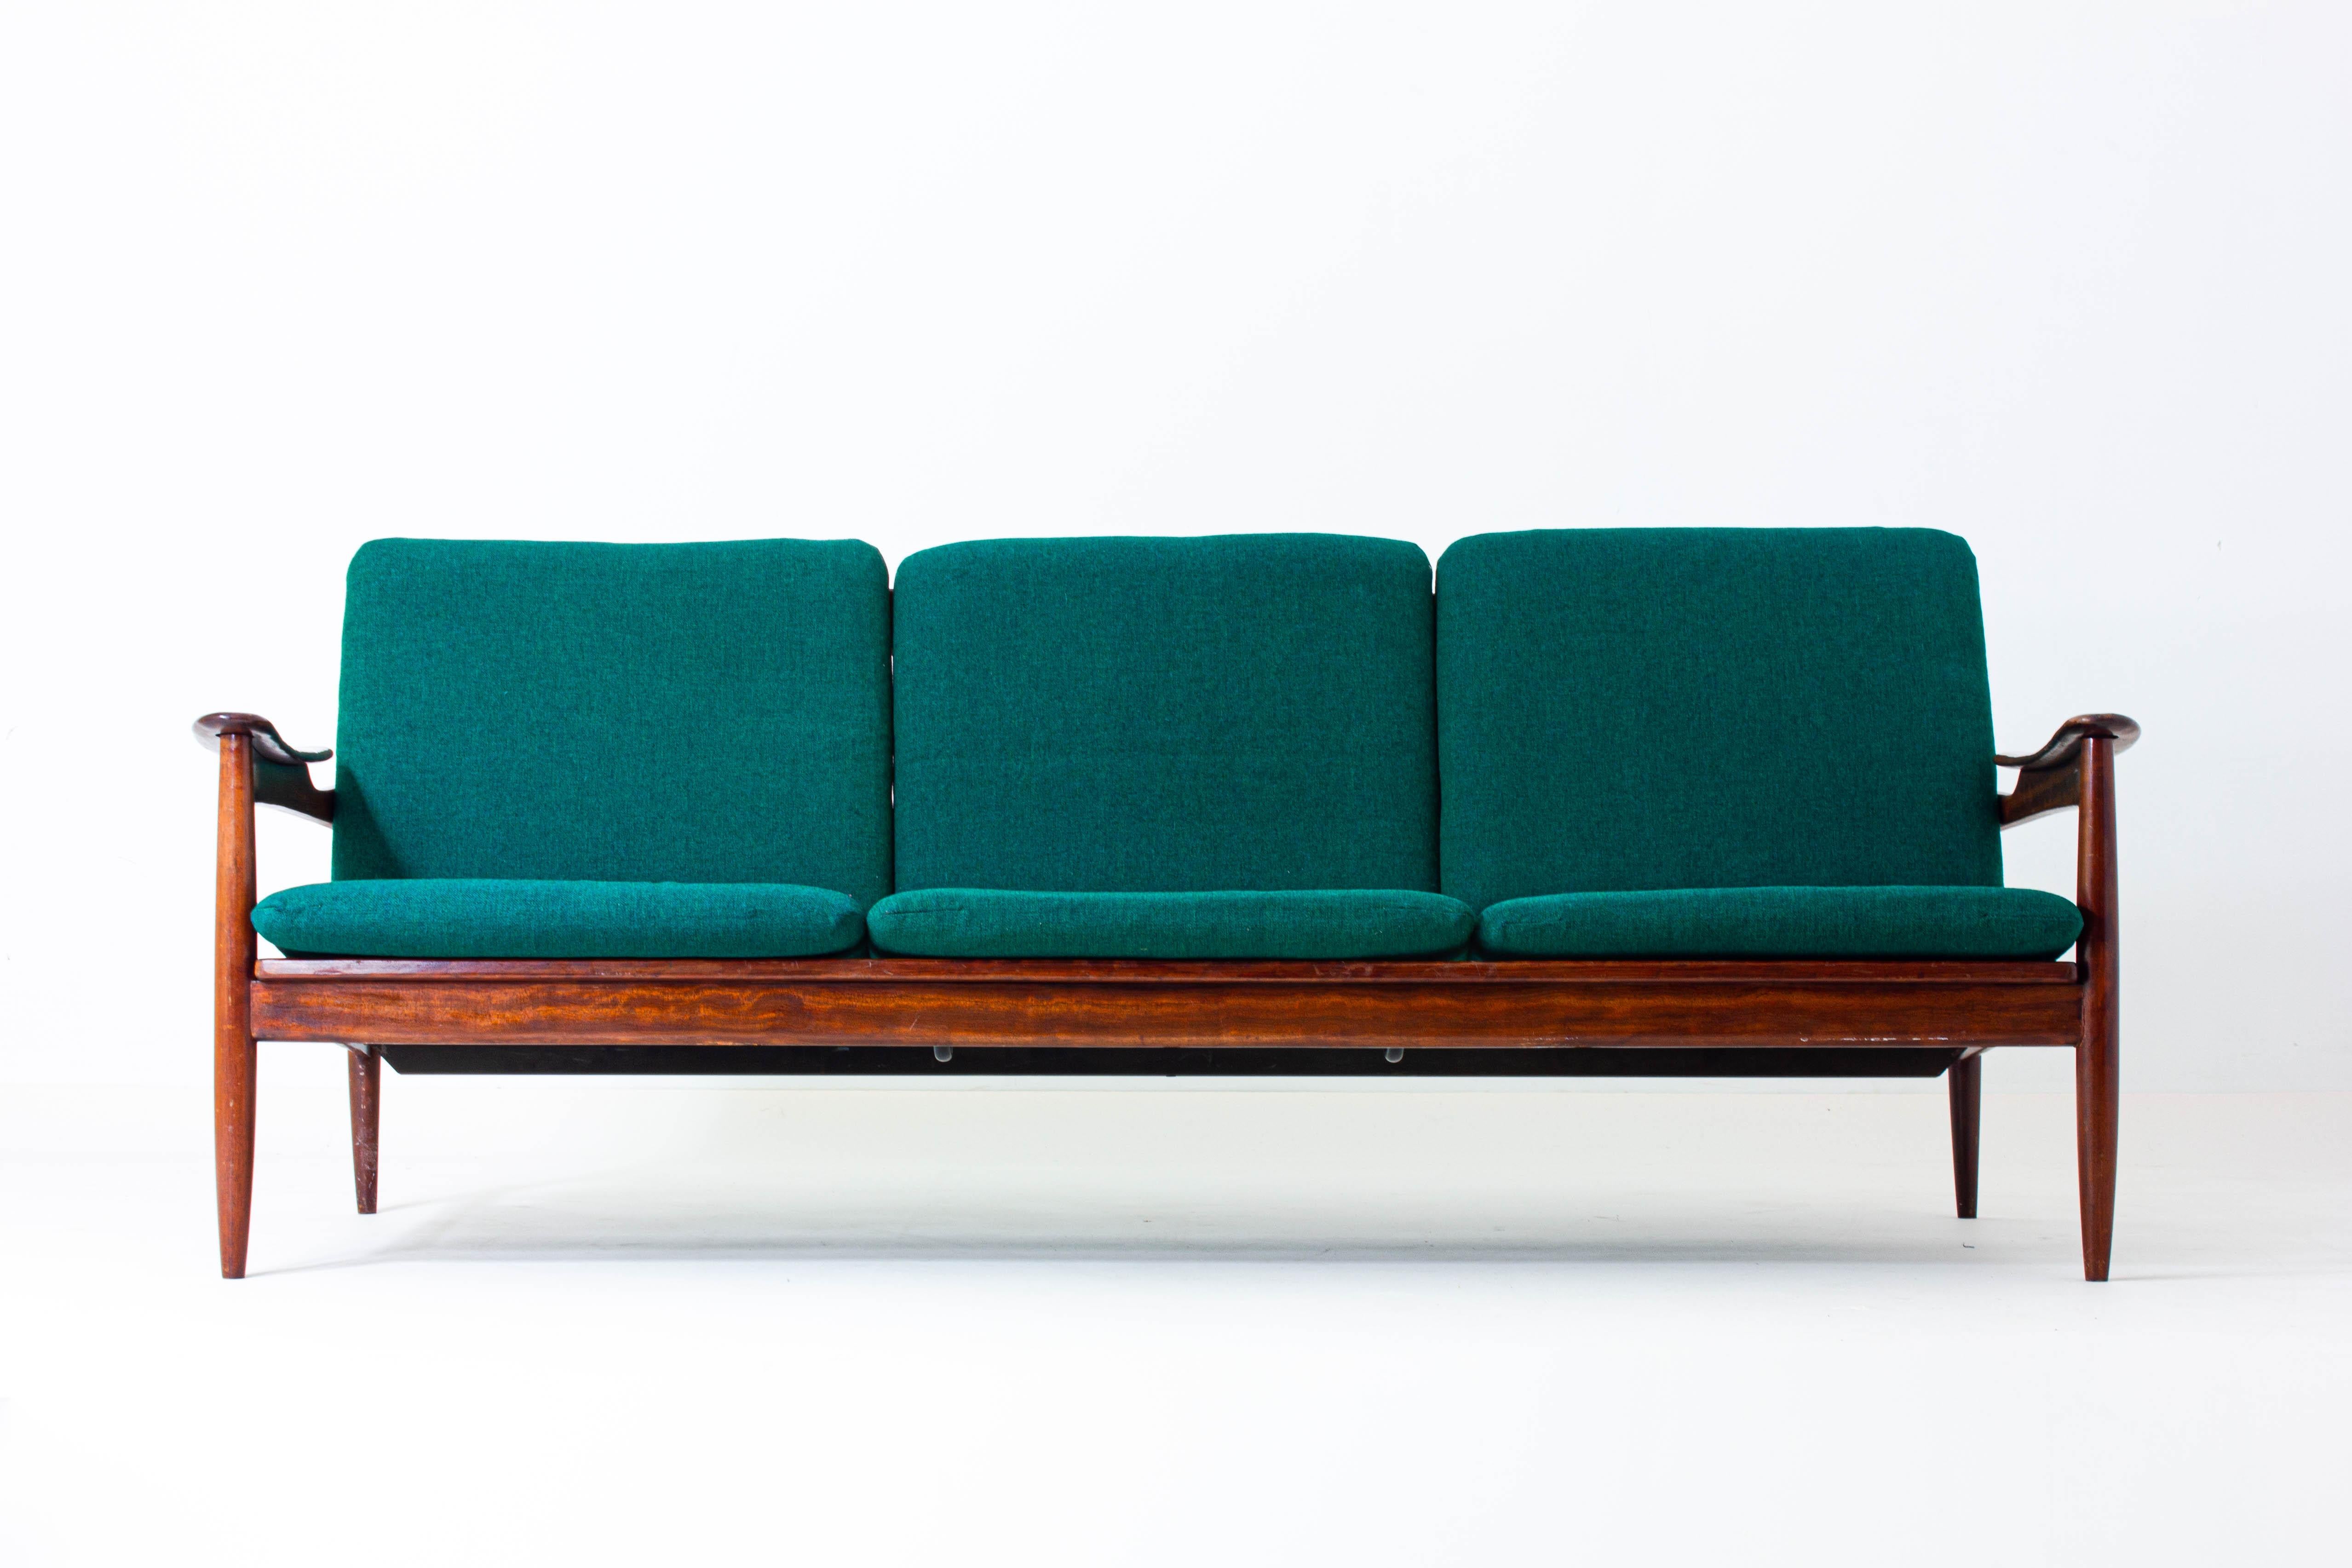 This very elegant Danish mid century three-seater from the 60s was made with premium rosewood and comes in an emerald green upholstery.

Thanks to its subtle, but refined presence, this stunner can be used as a main seating element or as a